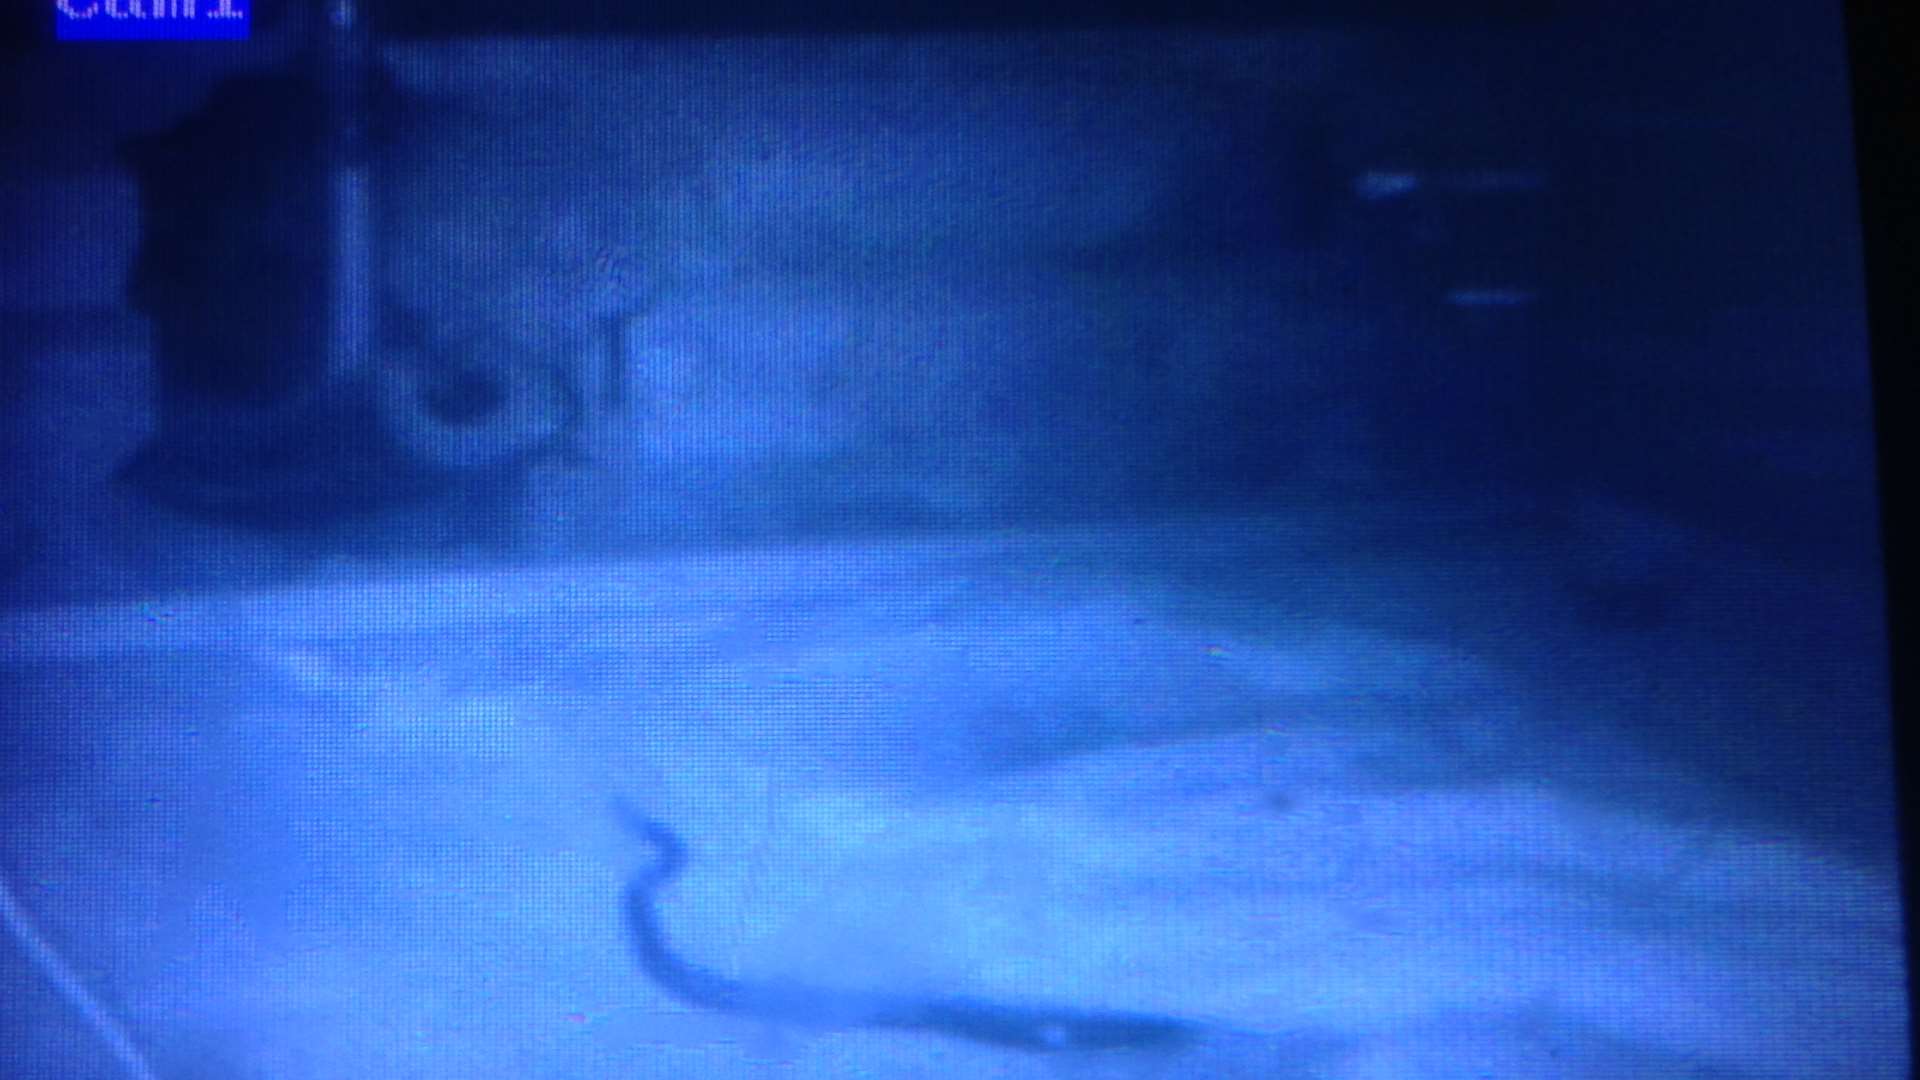 Footage captured on camera of the snake on top of the washing machine and tumble dryer